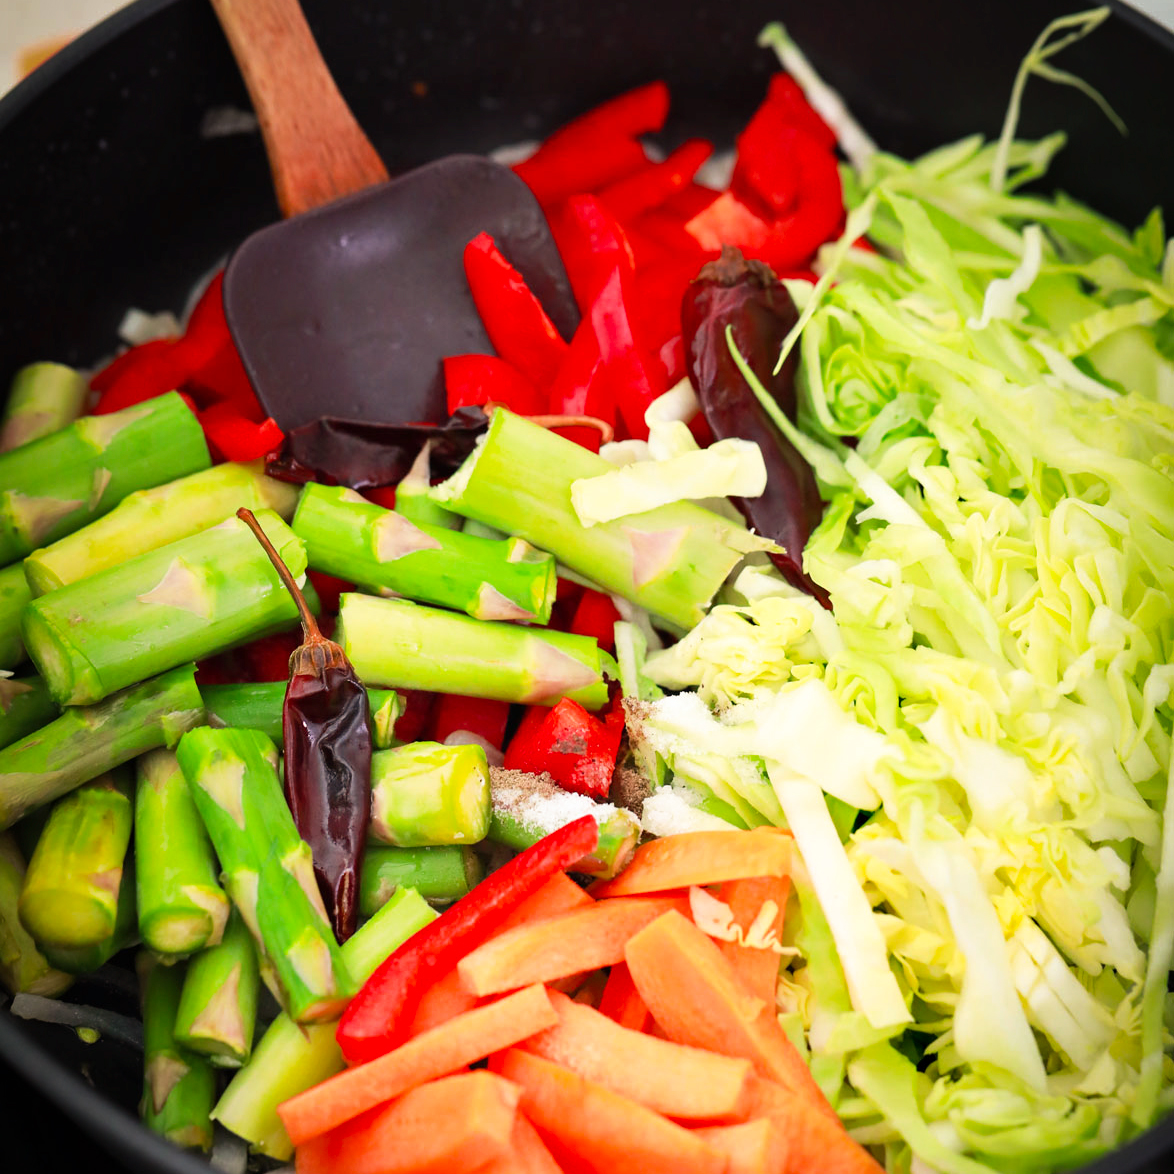 Someone using a spatula to stir vegetables in a skillet.